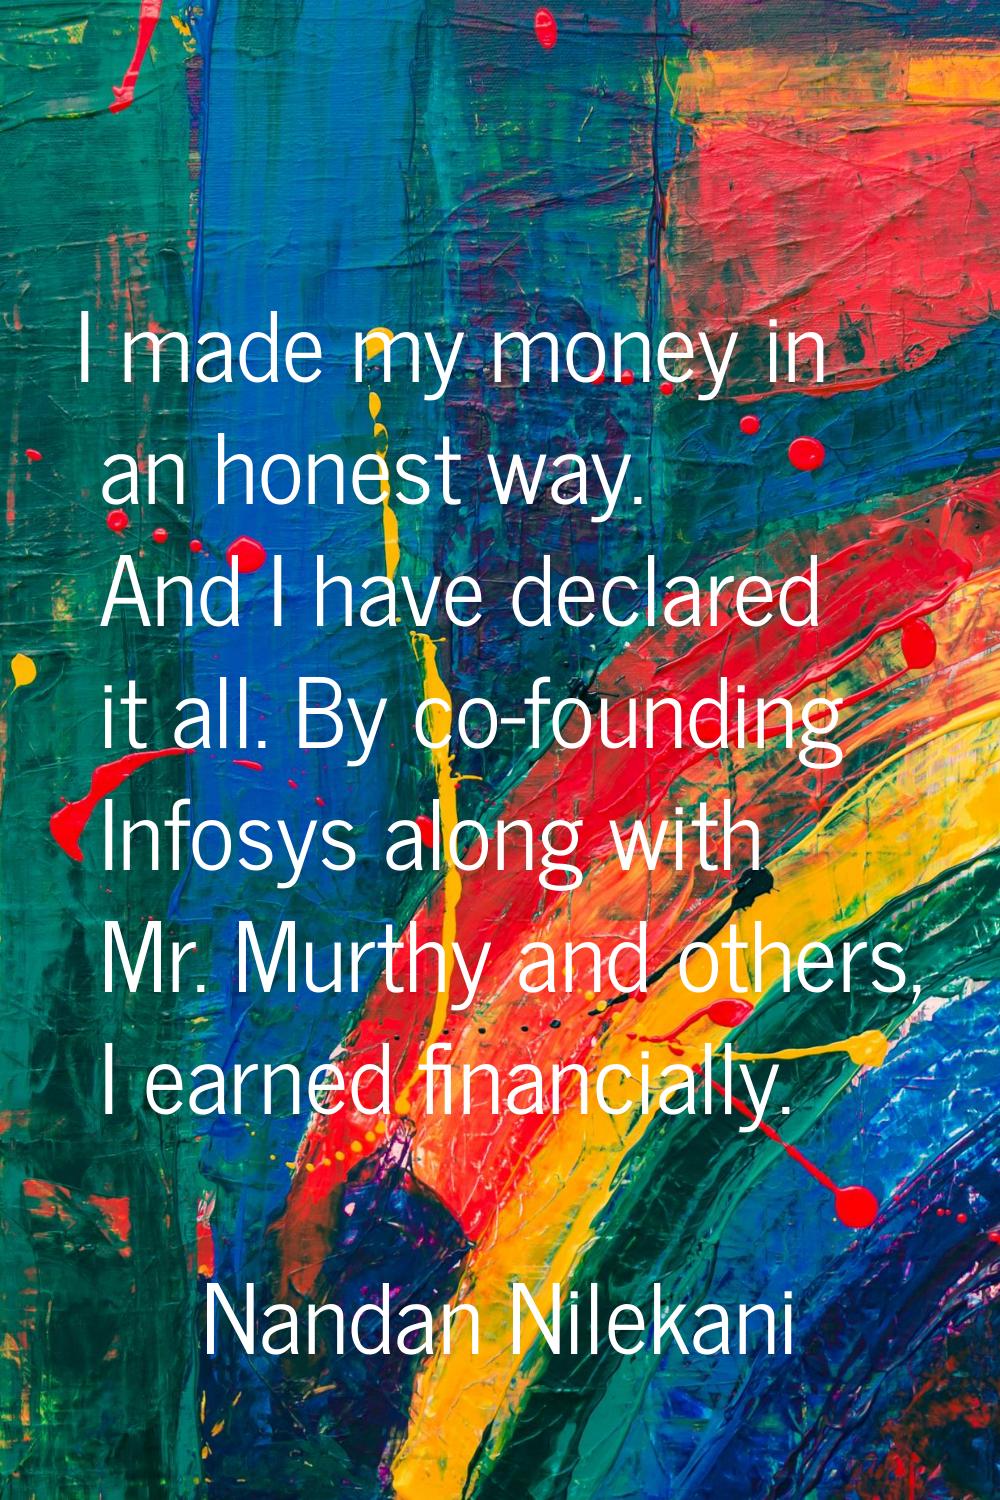 I made my money in an honest way. And I have declared it all. By co-founding Infosys along with Mr.